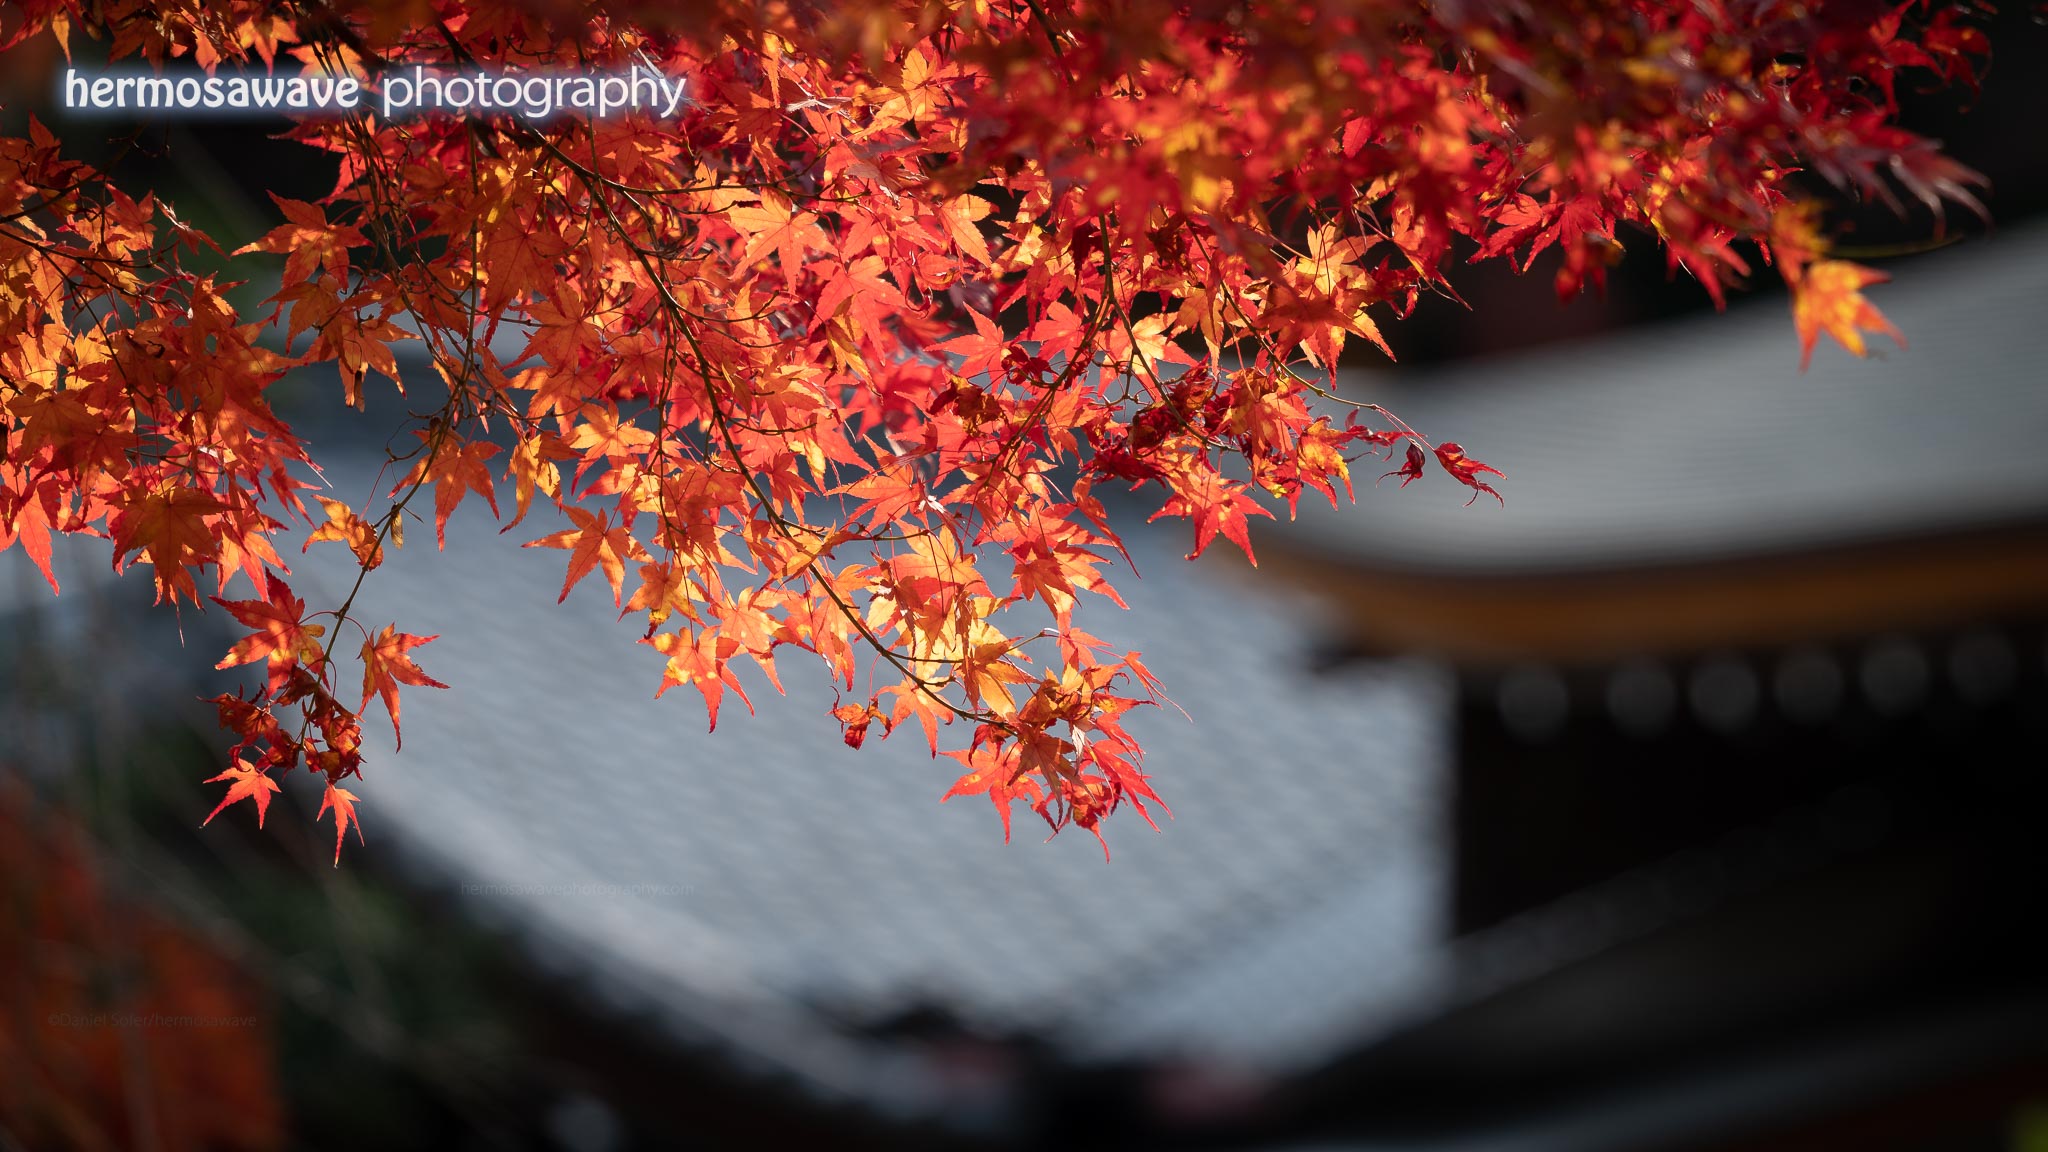 Maple Leaves at Nison-in・二尊院の紅葉